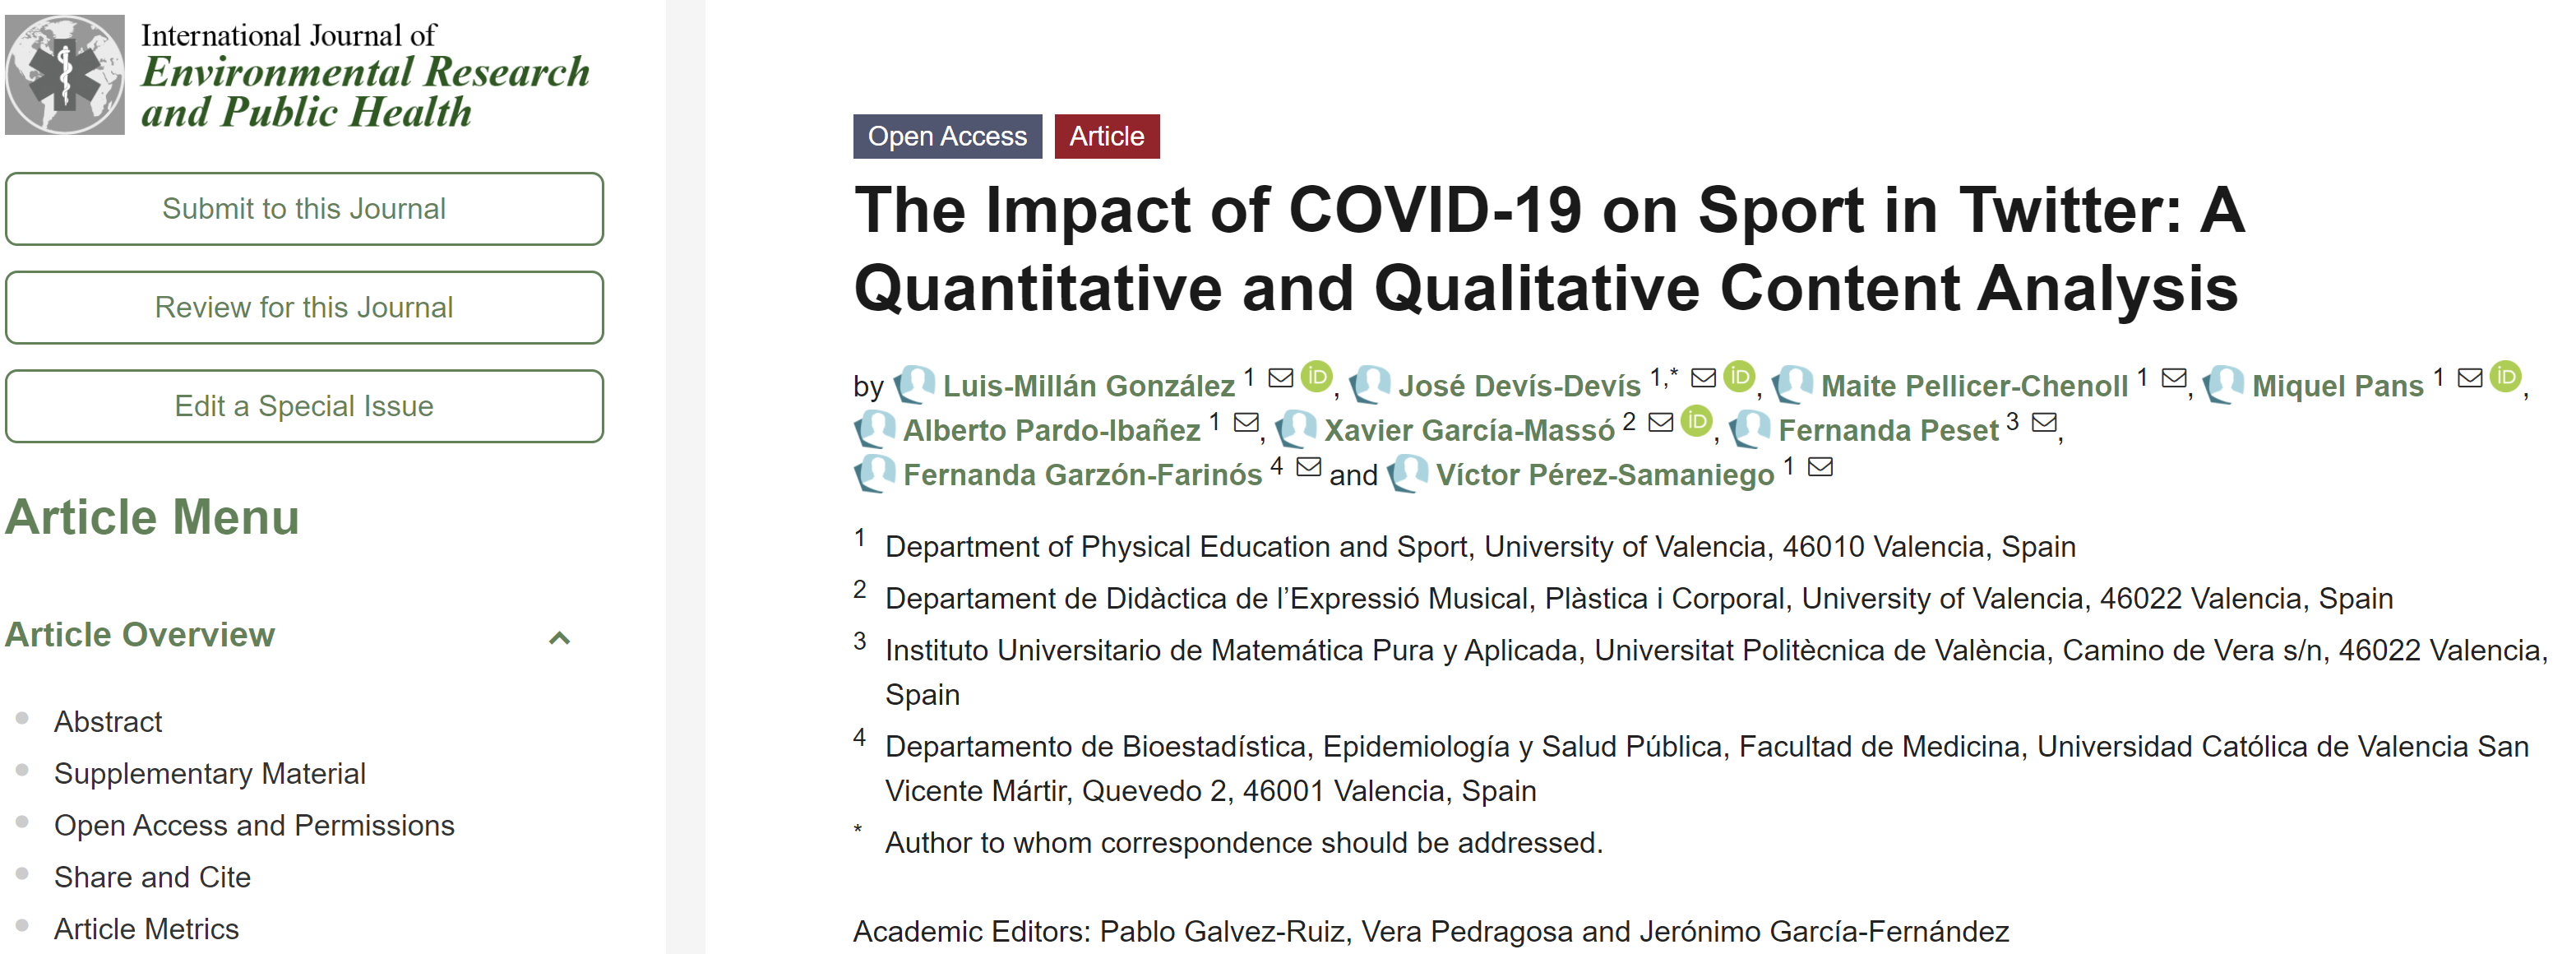 The Impact of COVID-19 on Sport in Twitter